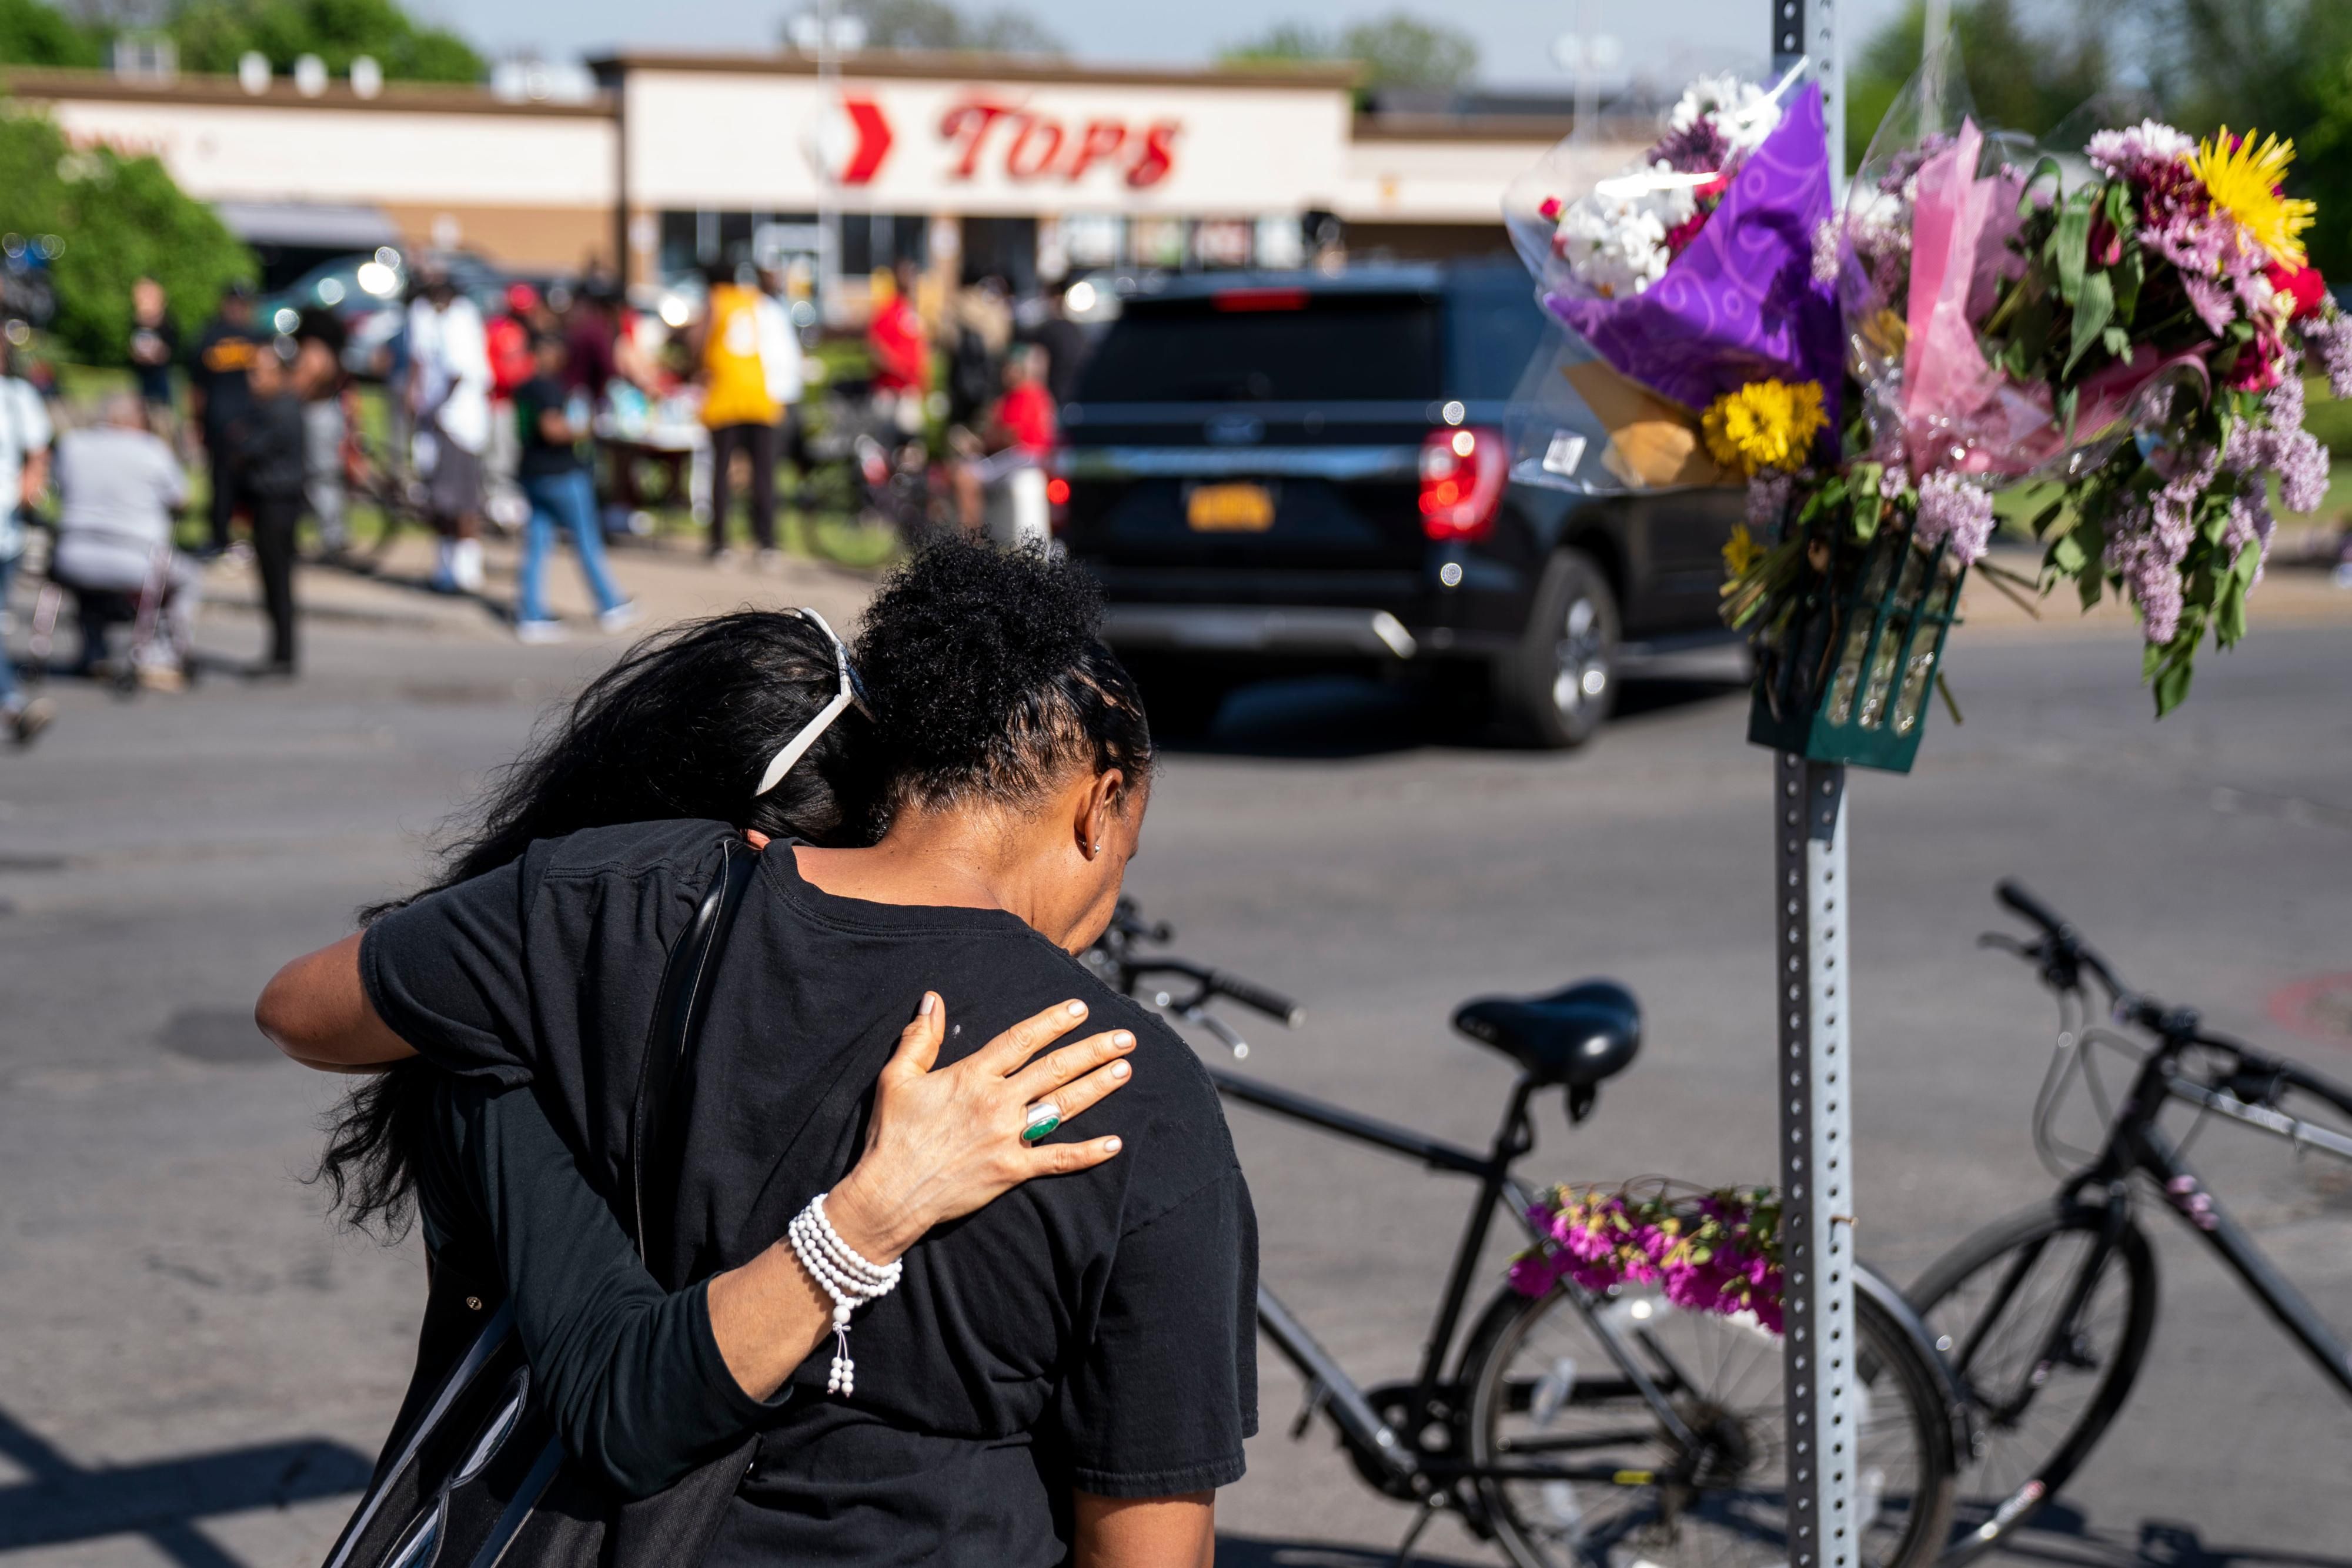 Mourners at Tops grocery store in Buffalo